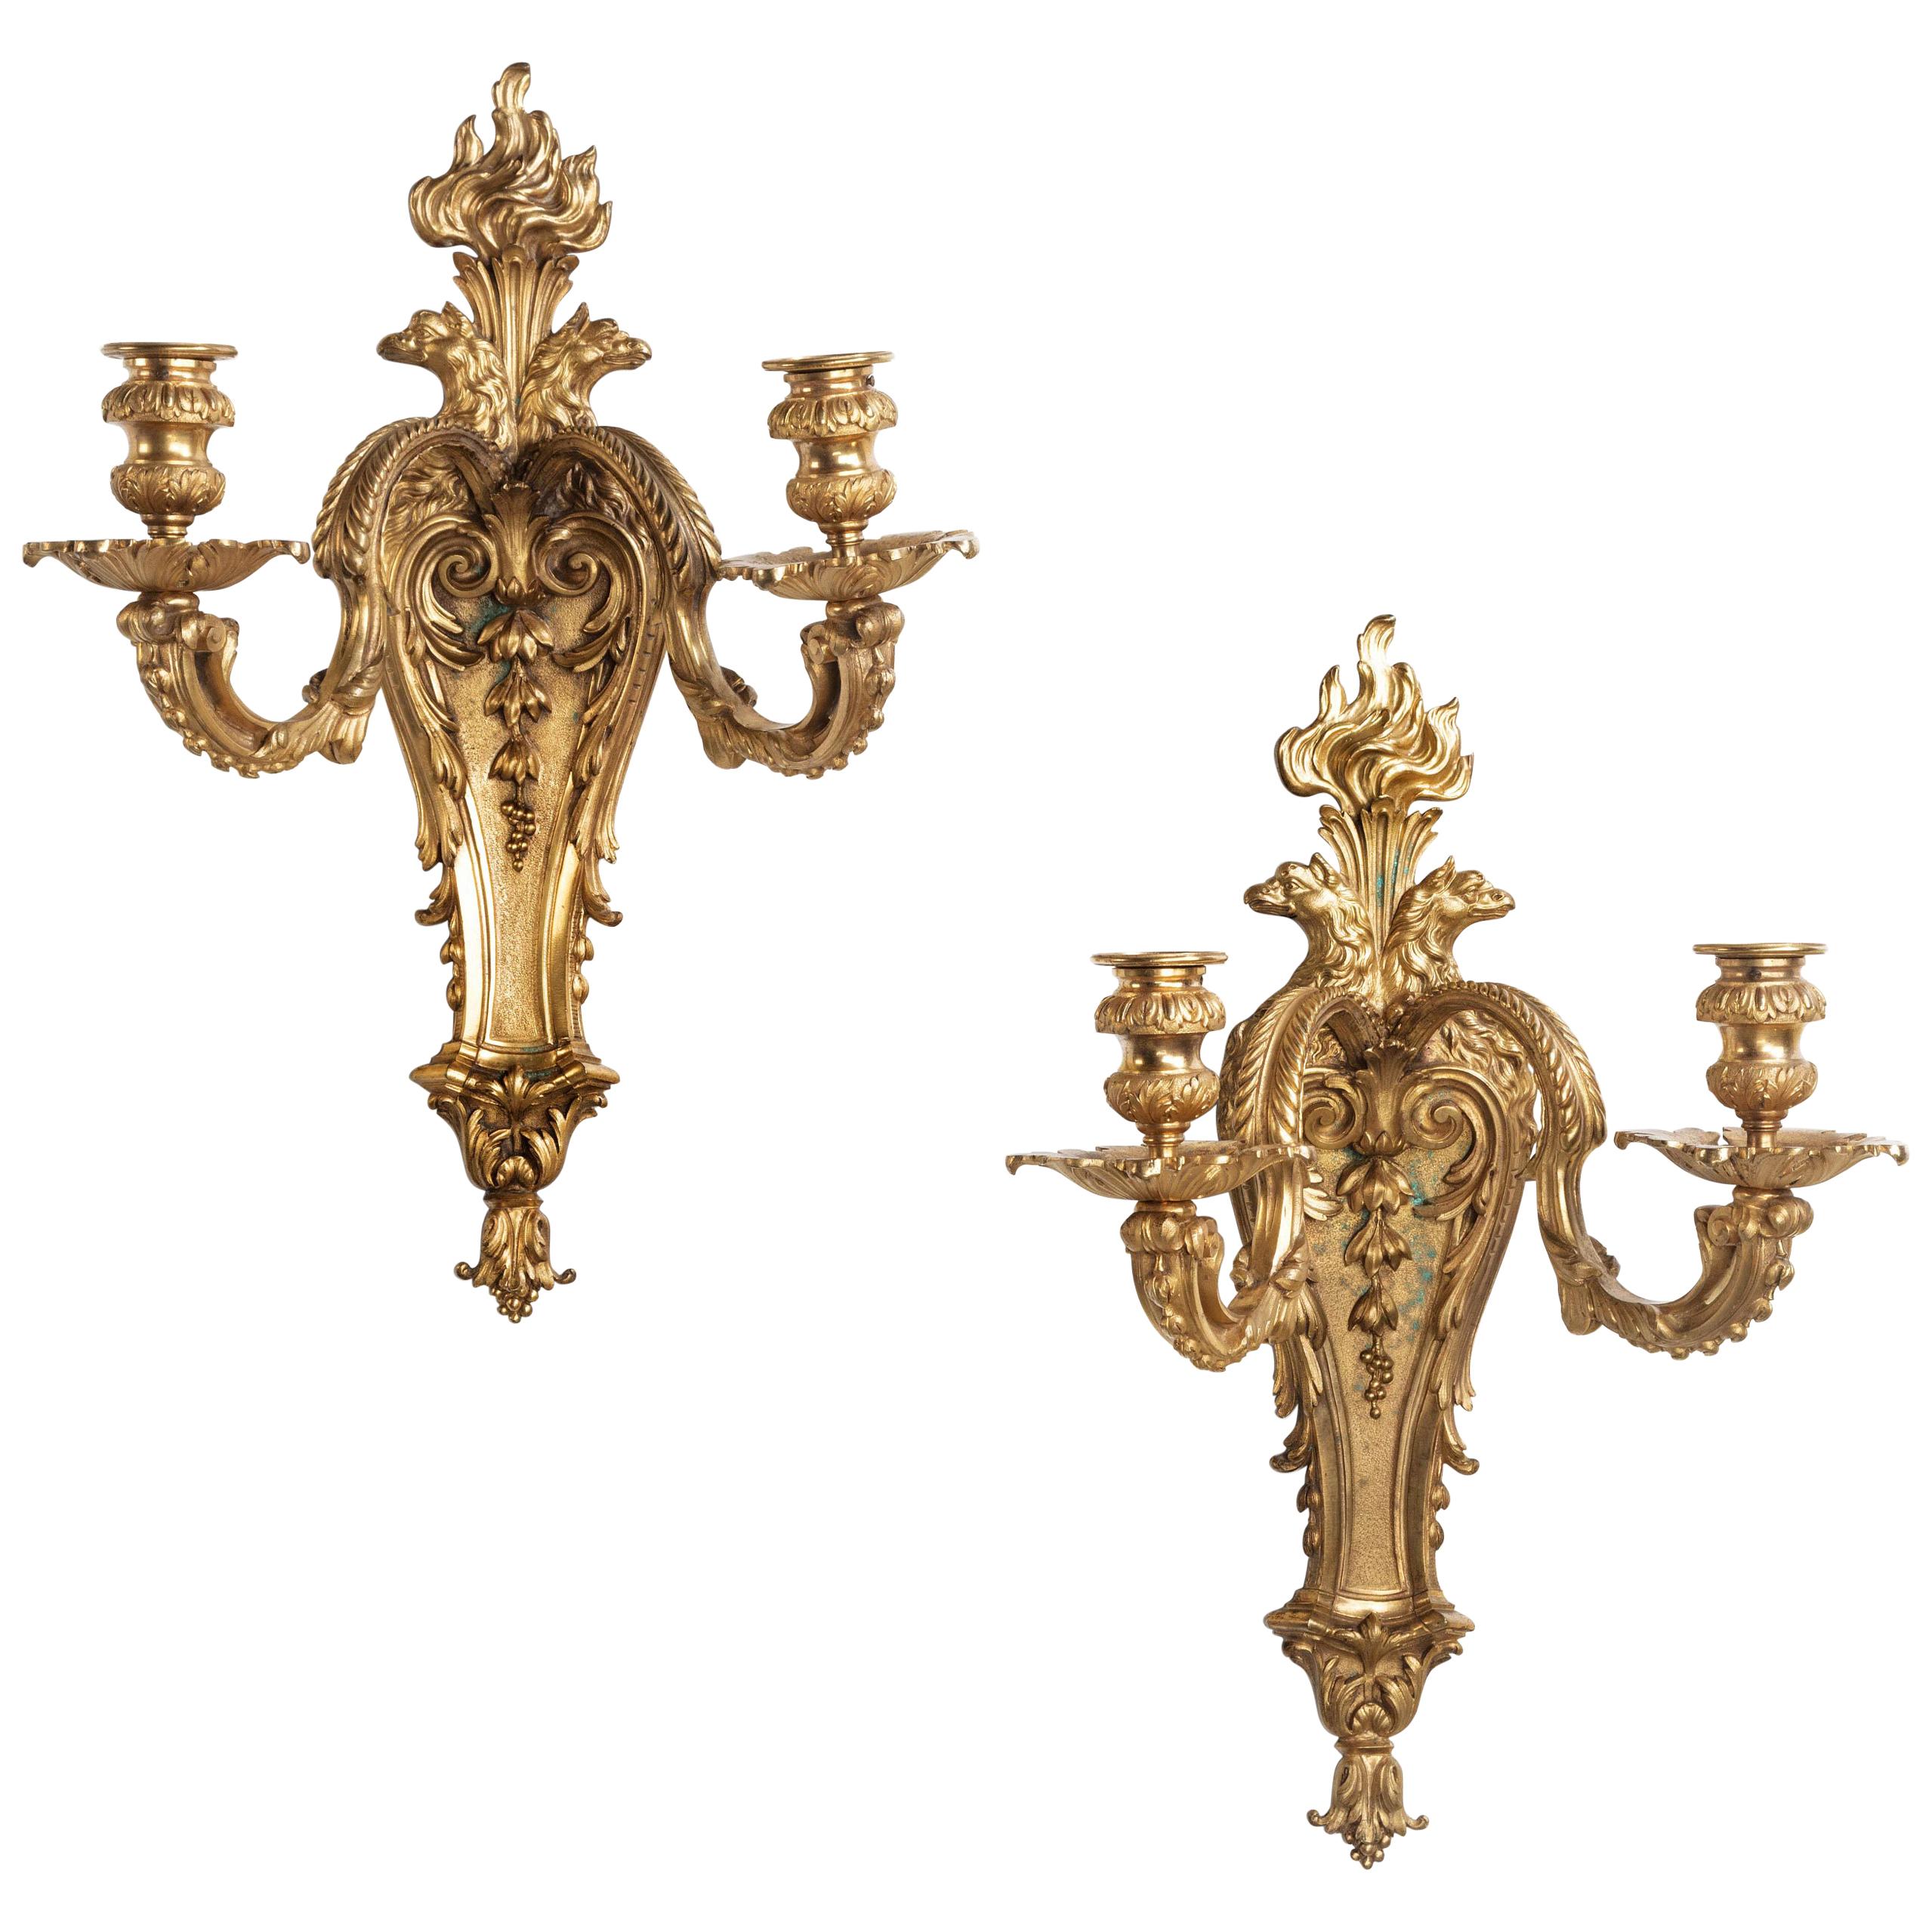 Outstanding Pair or Ormolu Wall Lights For Sale